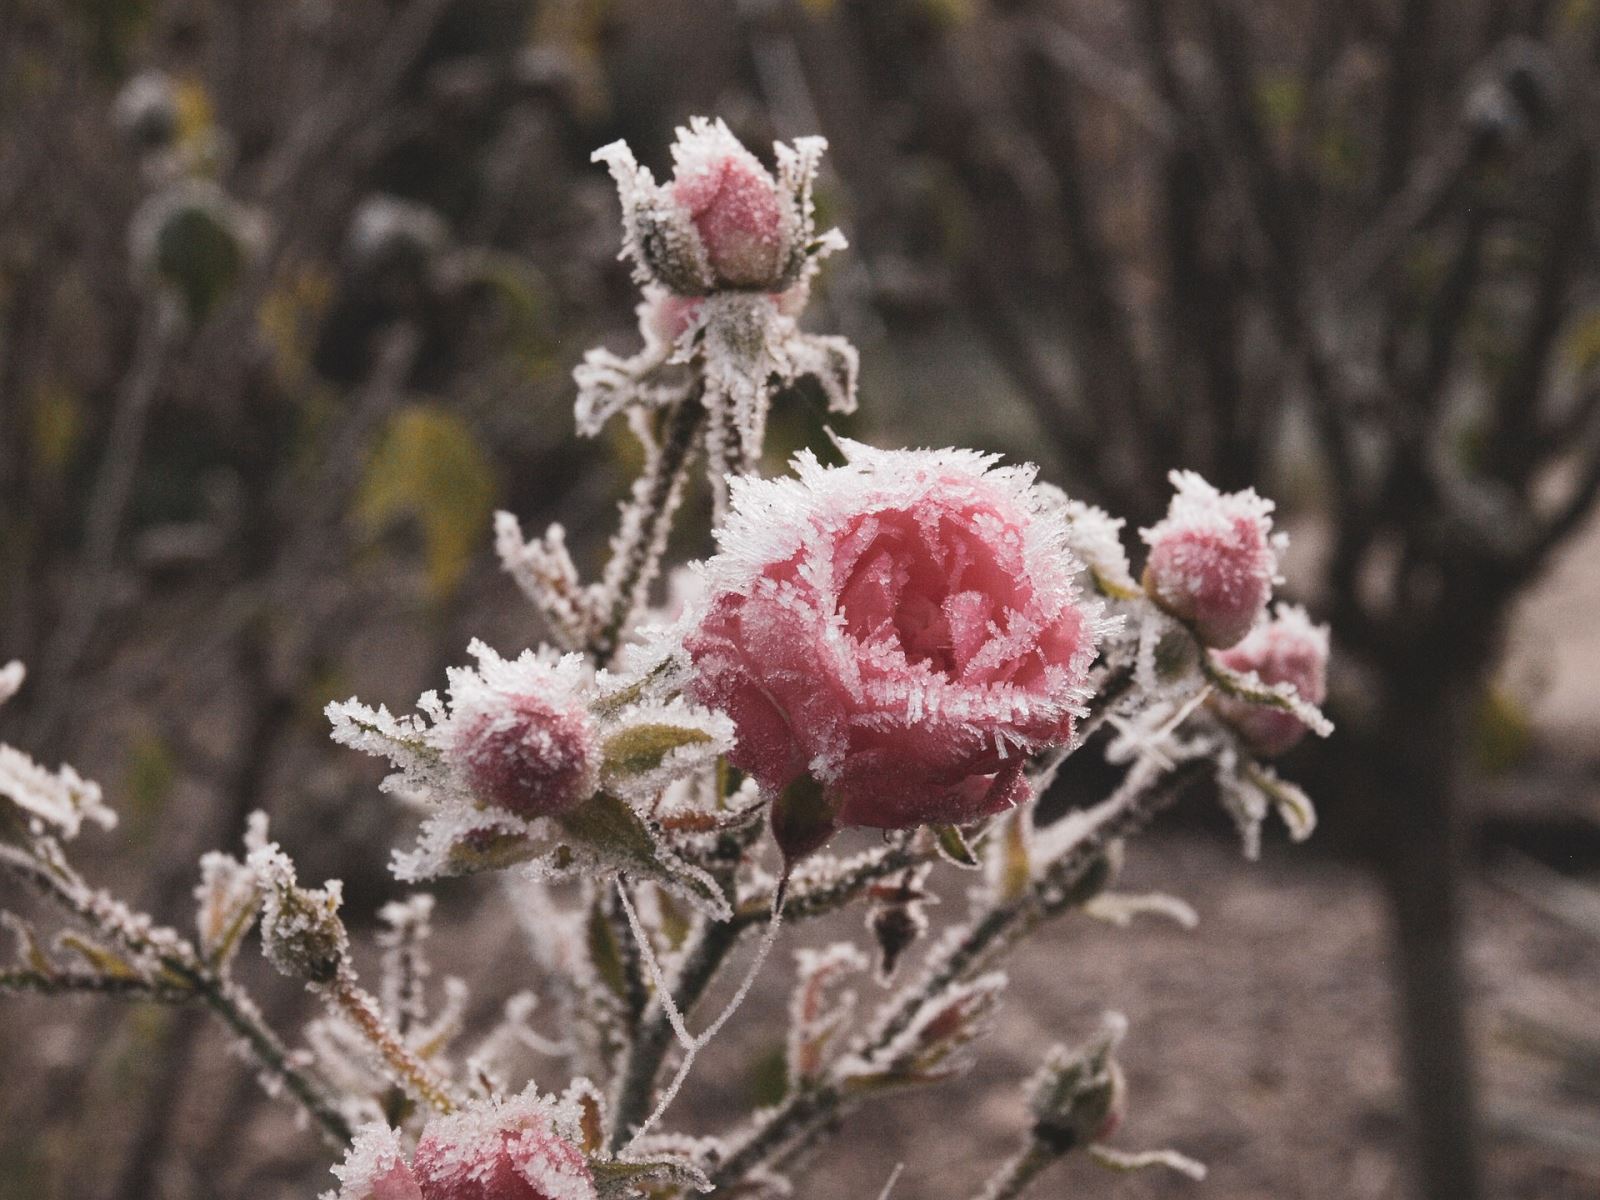 Tips for protecting plants from frost